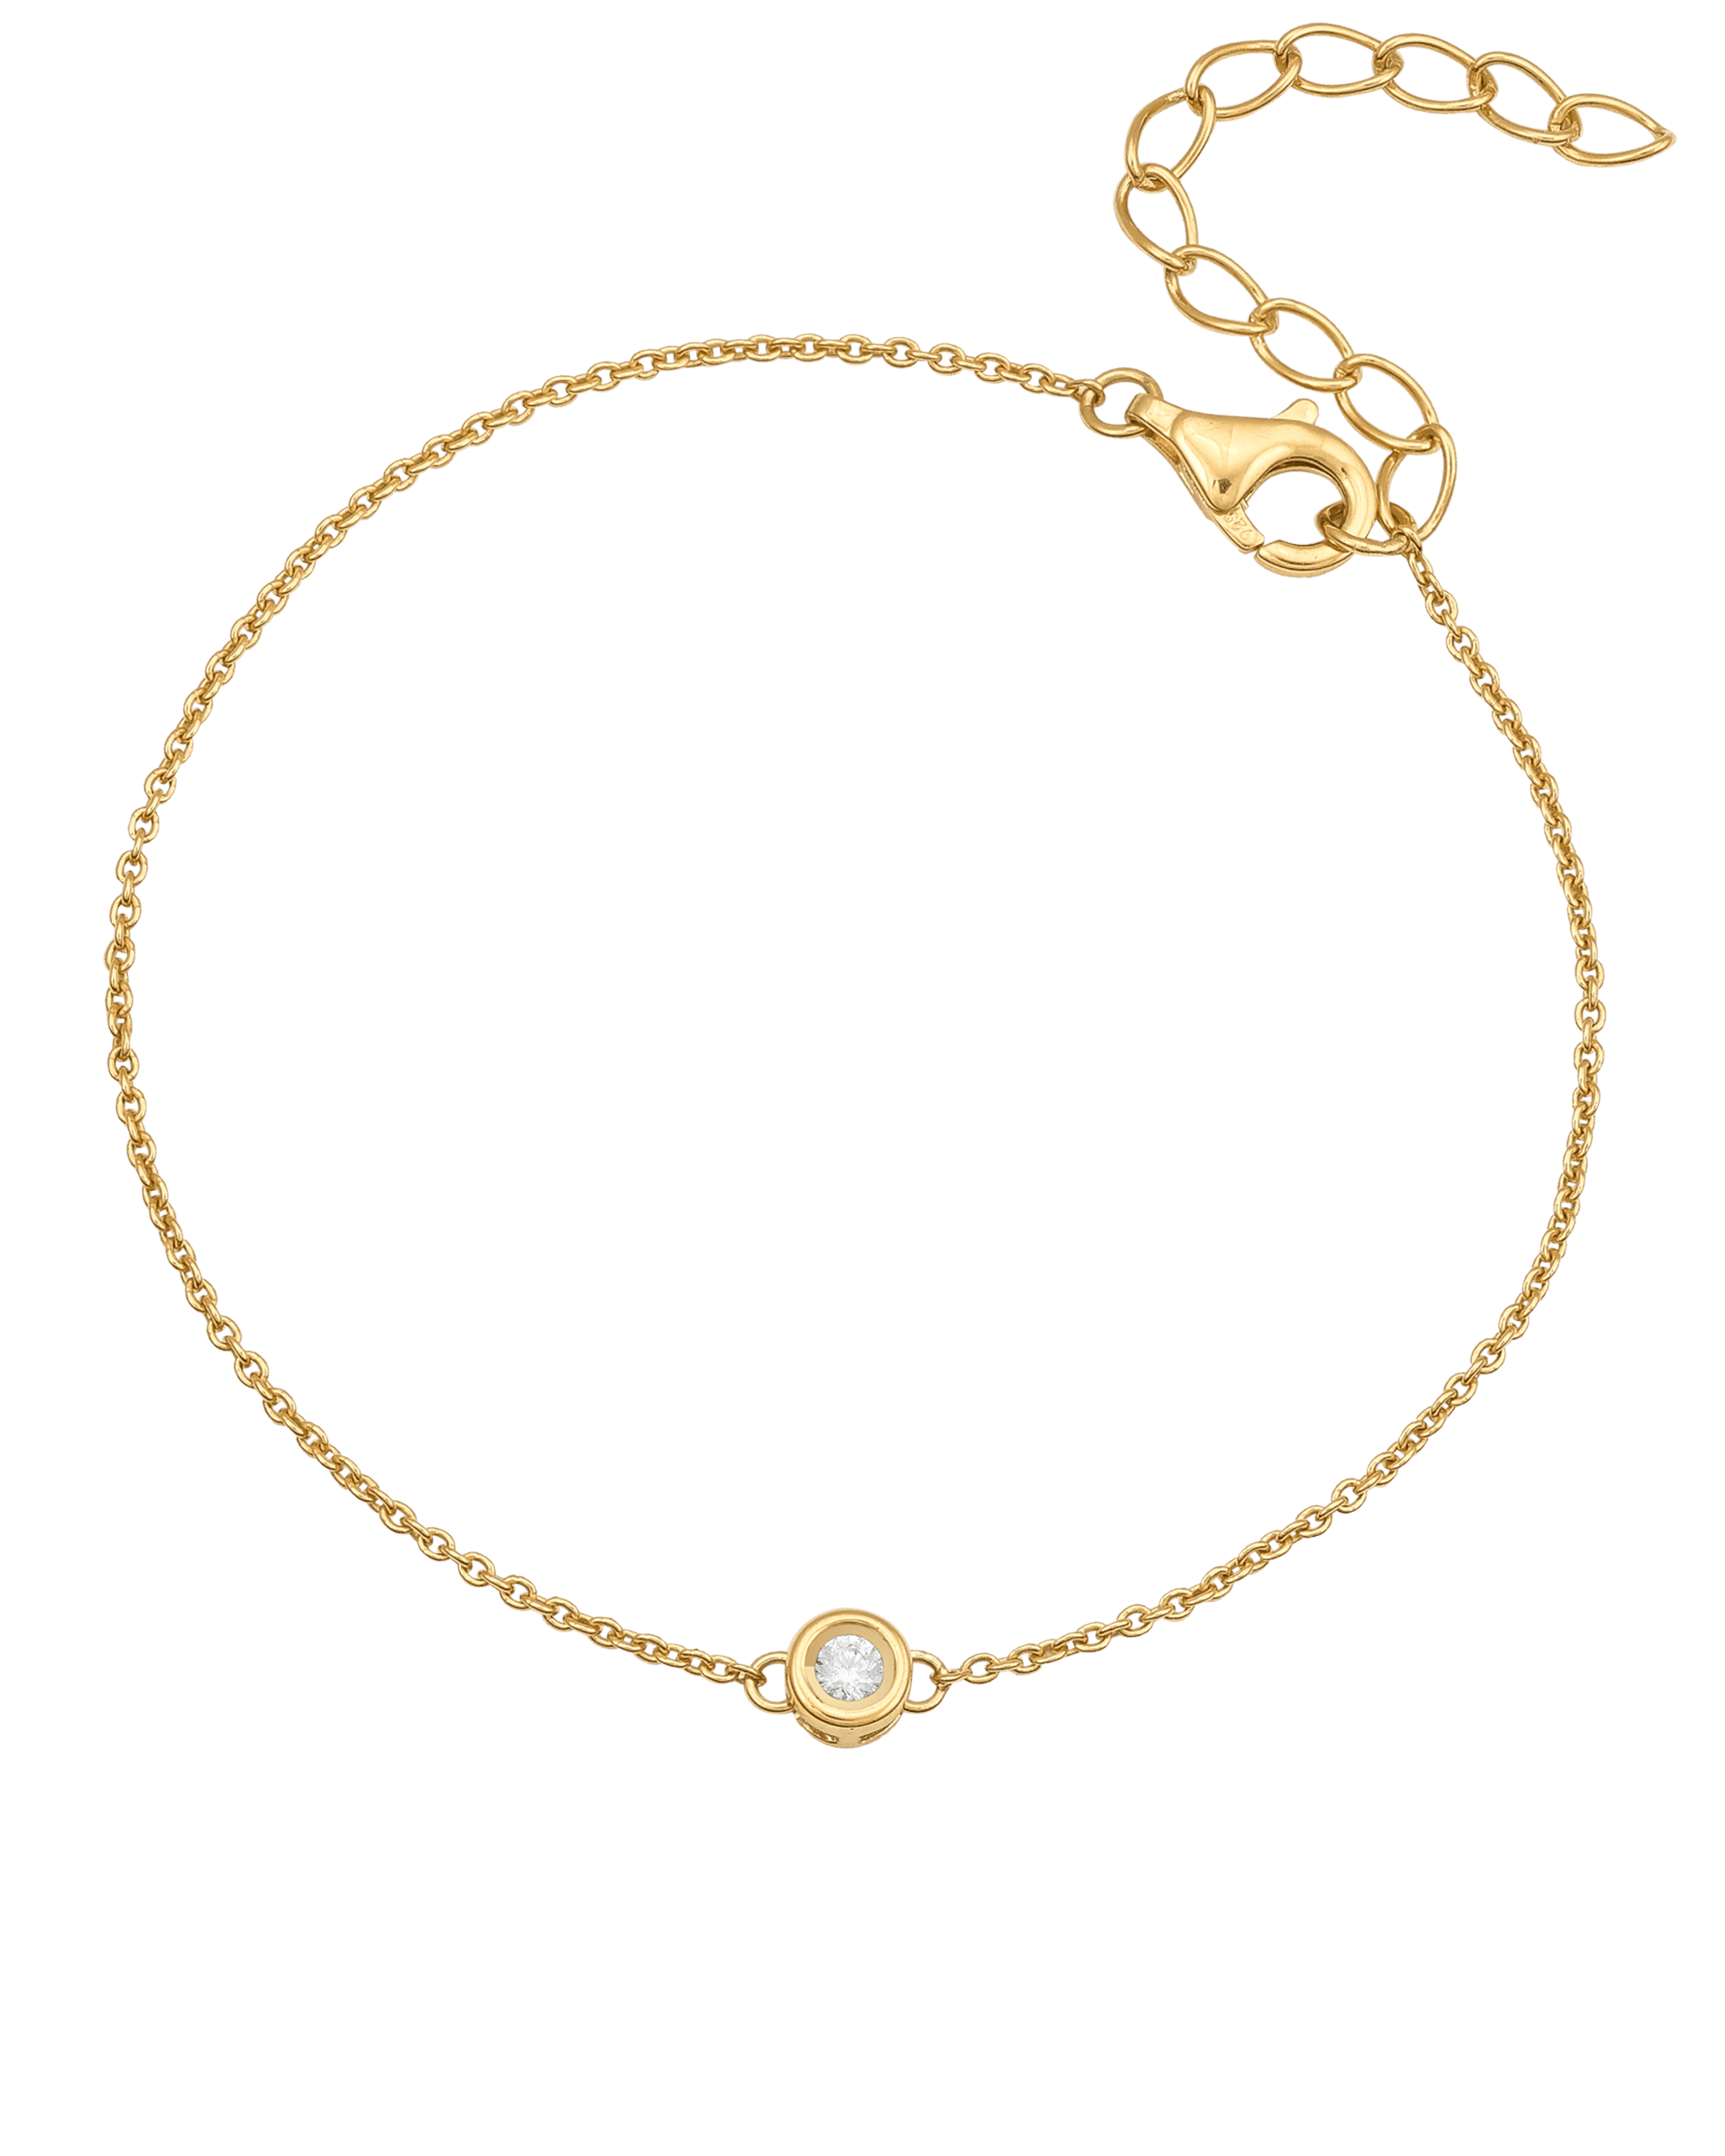 Chain of Love - 18K Gold Vermeil Bracelets magal-dev Small: 0.03ct 6" with 1.5" extender 